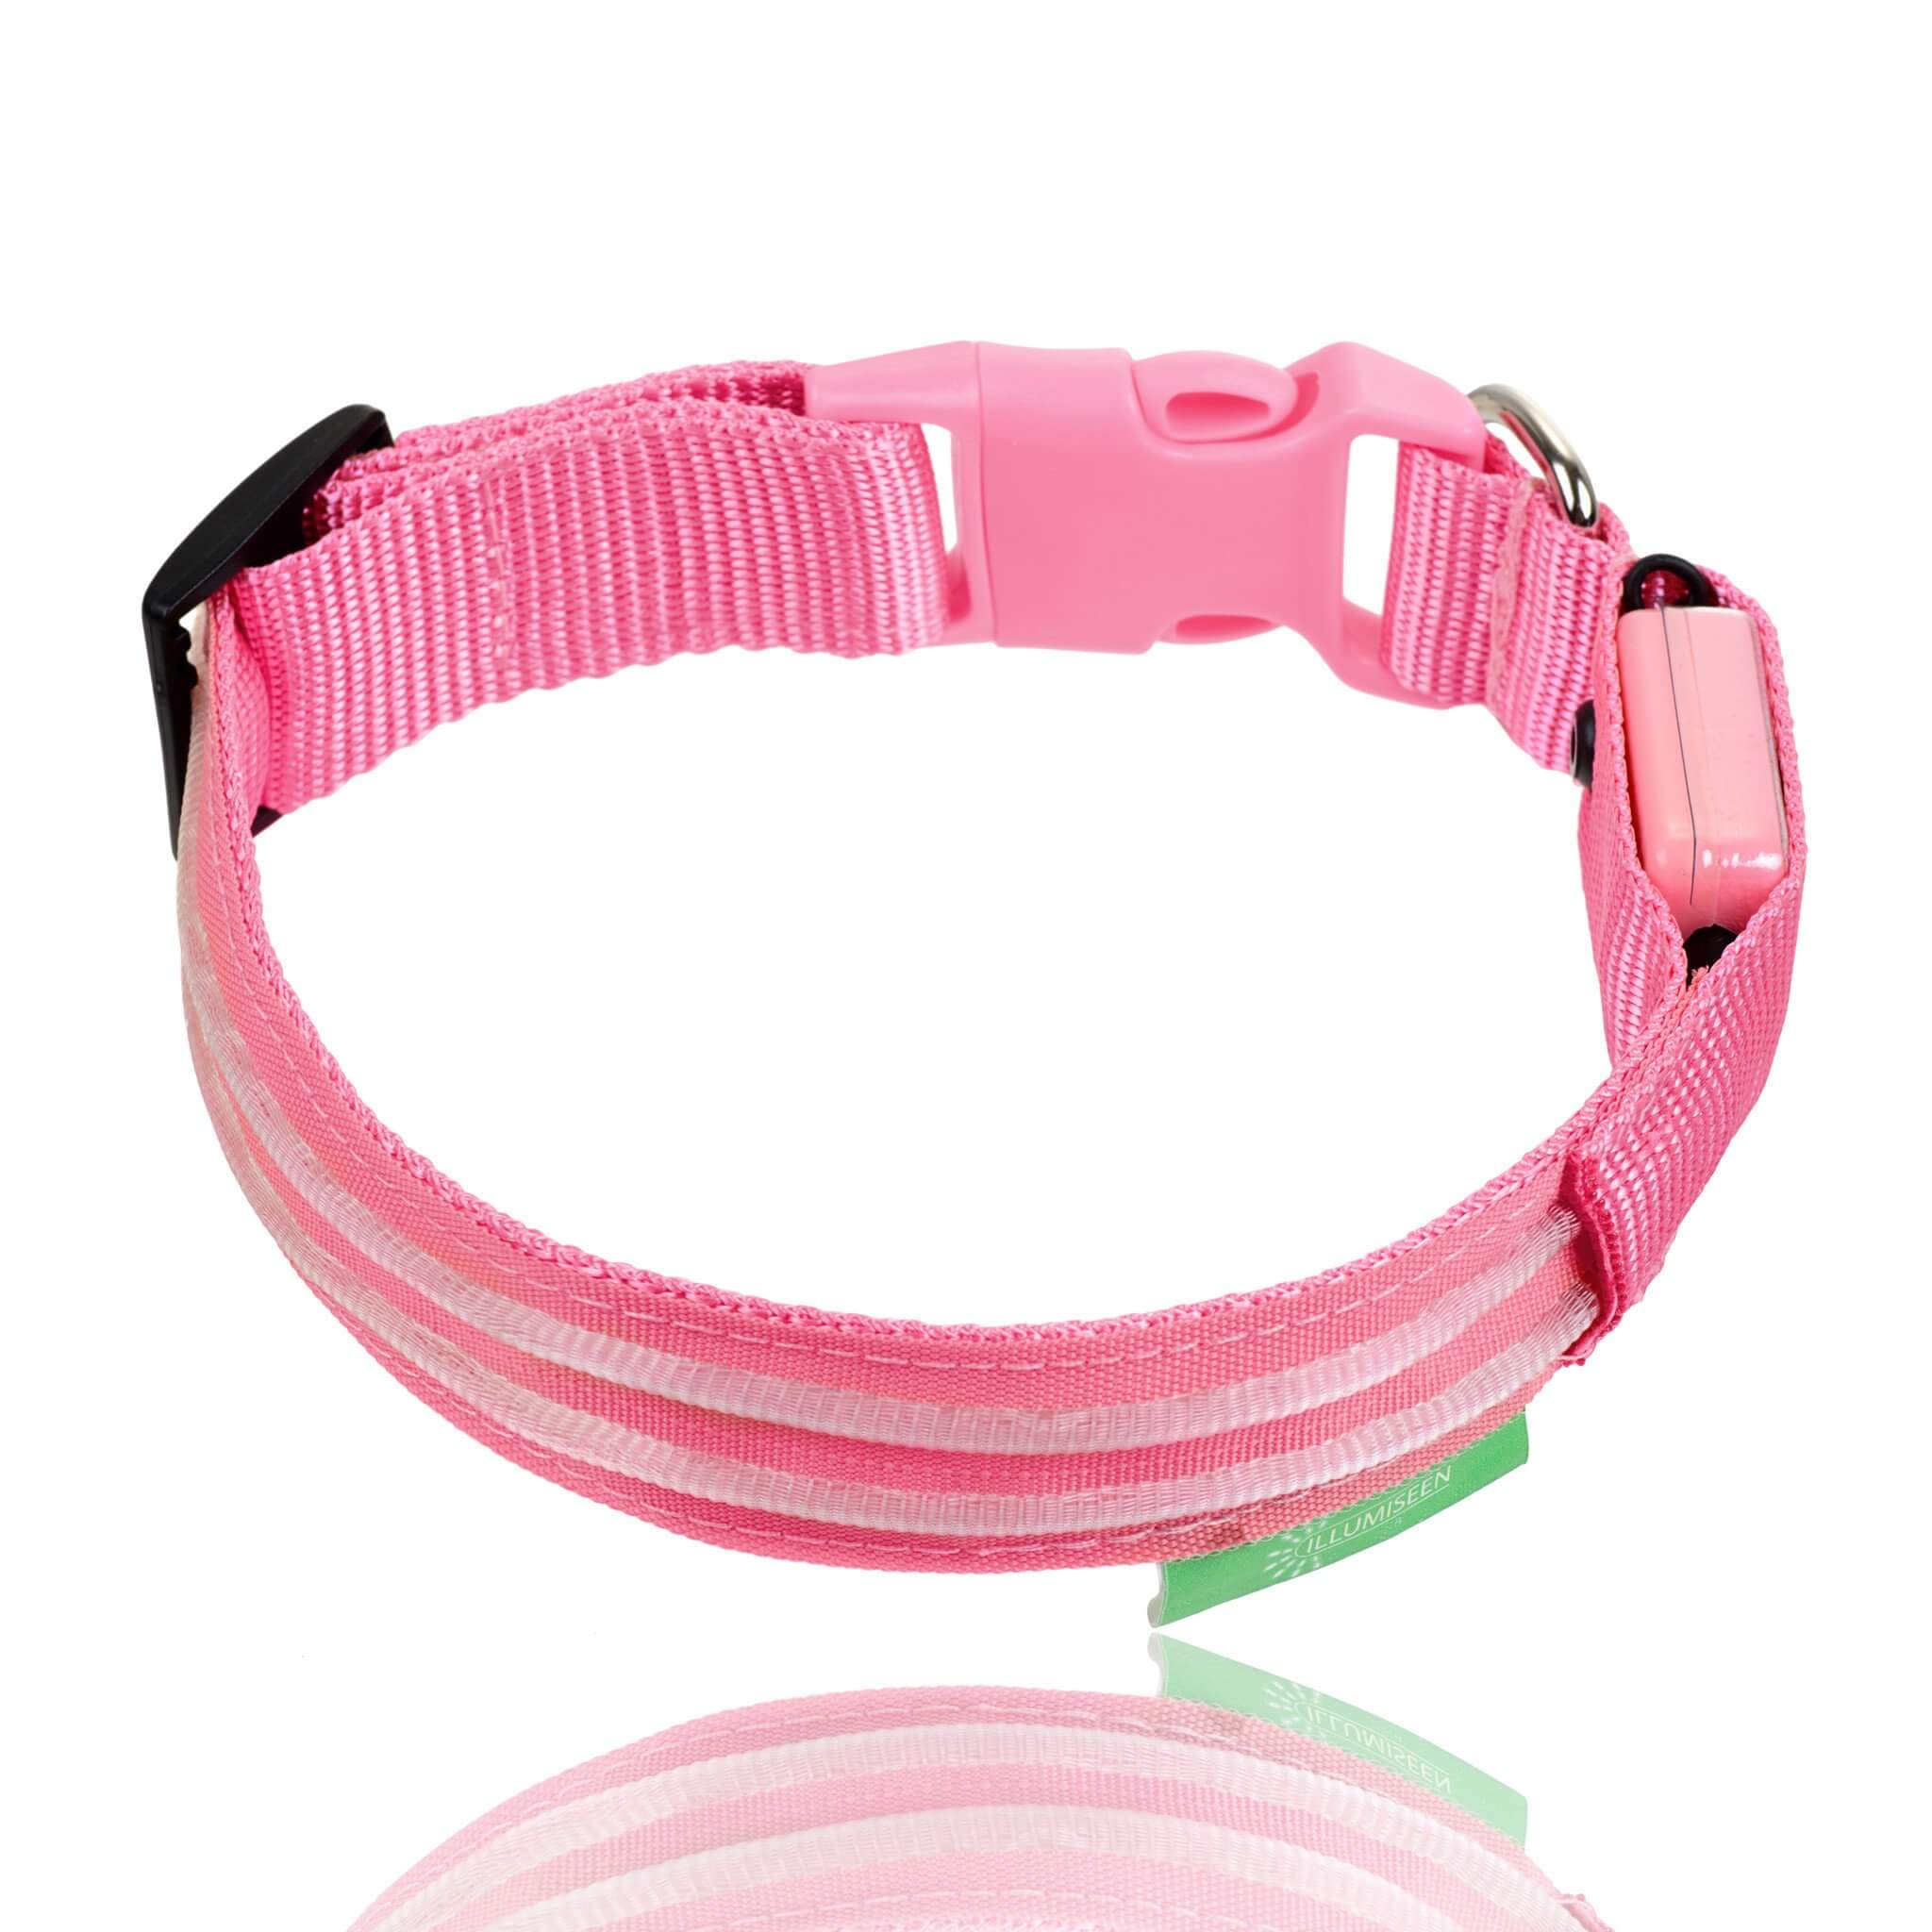 Illumiseen LED Dog Collar USB Rechargeable Bright & High Visibility